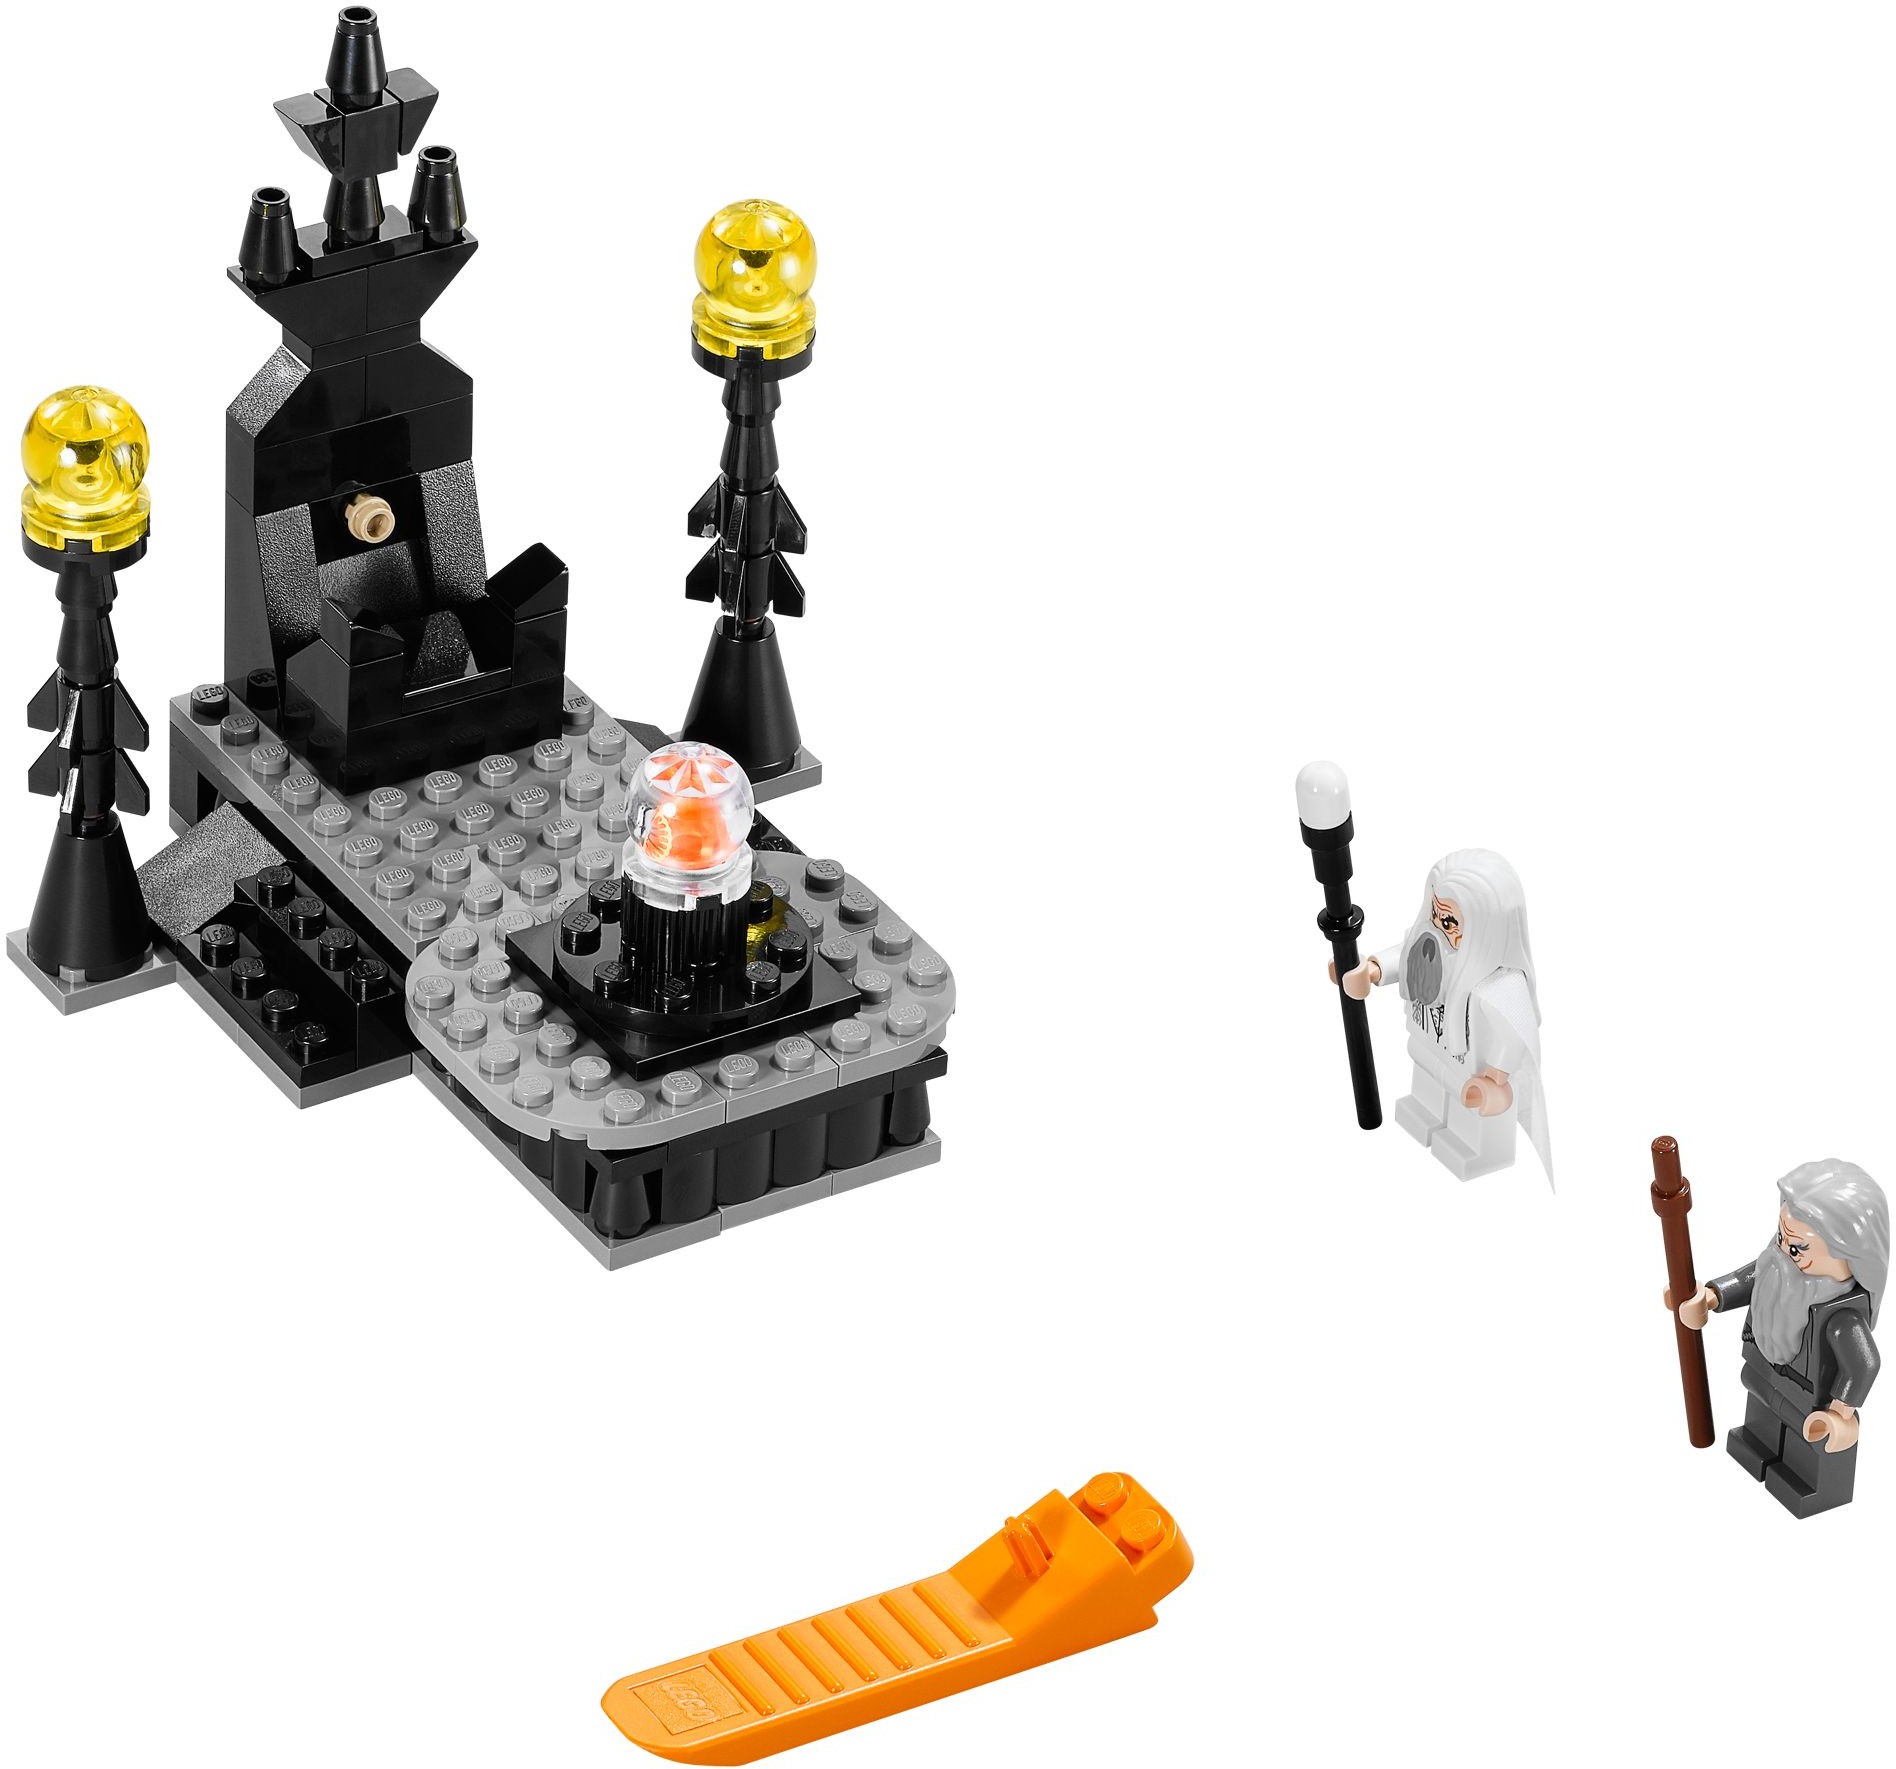 Every 'The Lord of the Rings' LEGO Set Ever Made, Ranked by Size